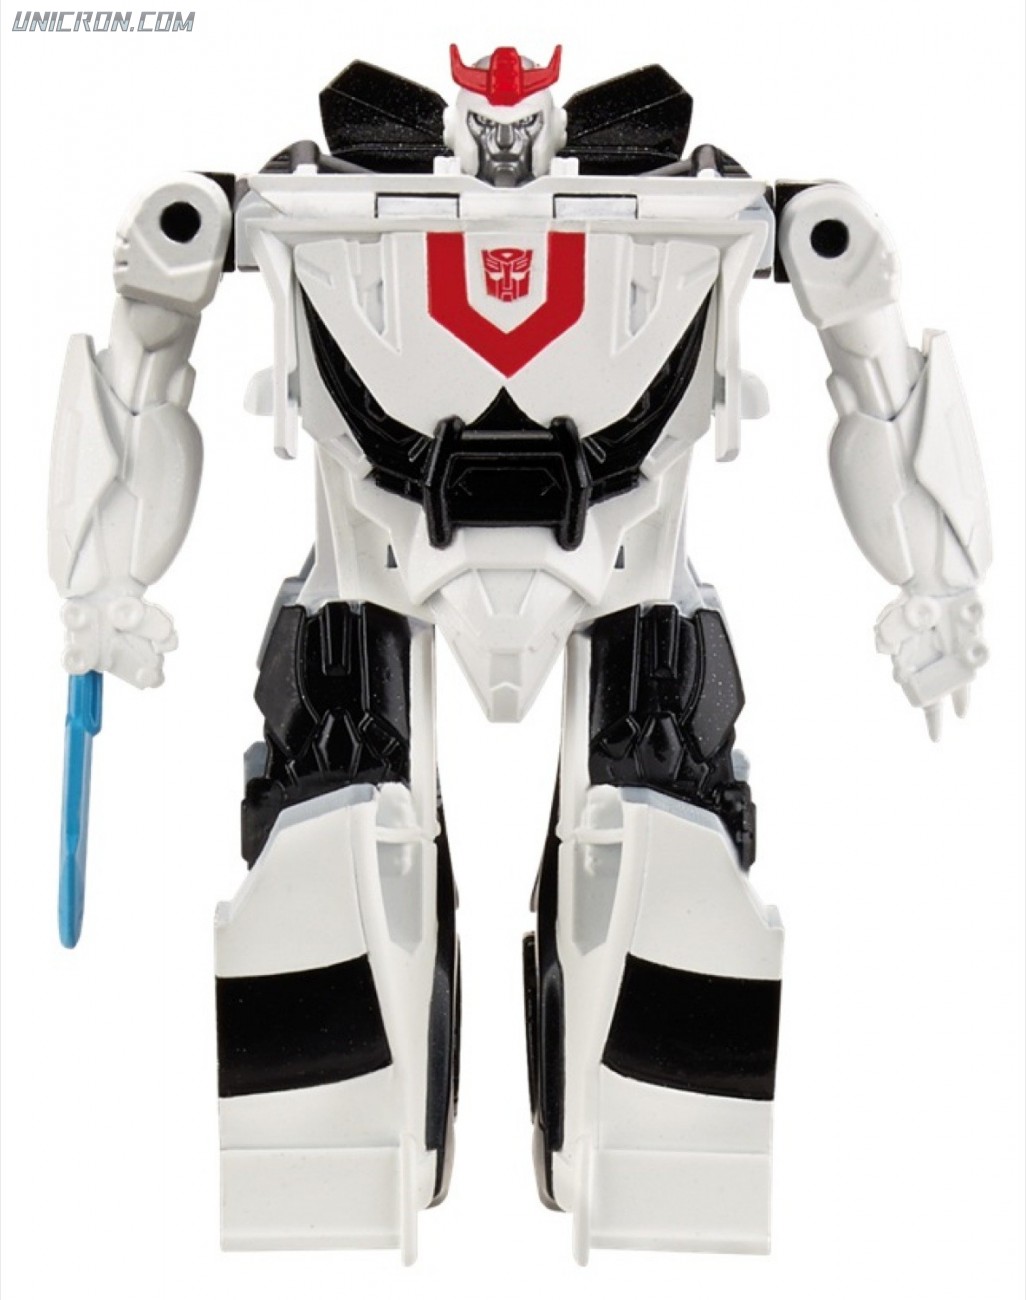 Transformers 4 Age of Extinction Prowl (1-step changer AoE) toy